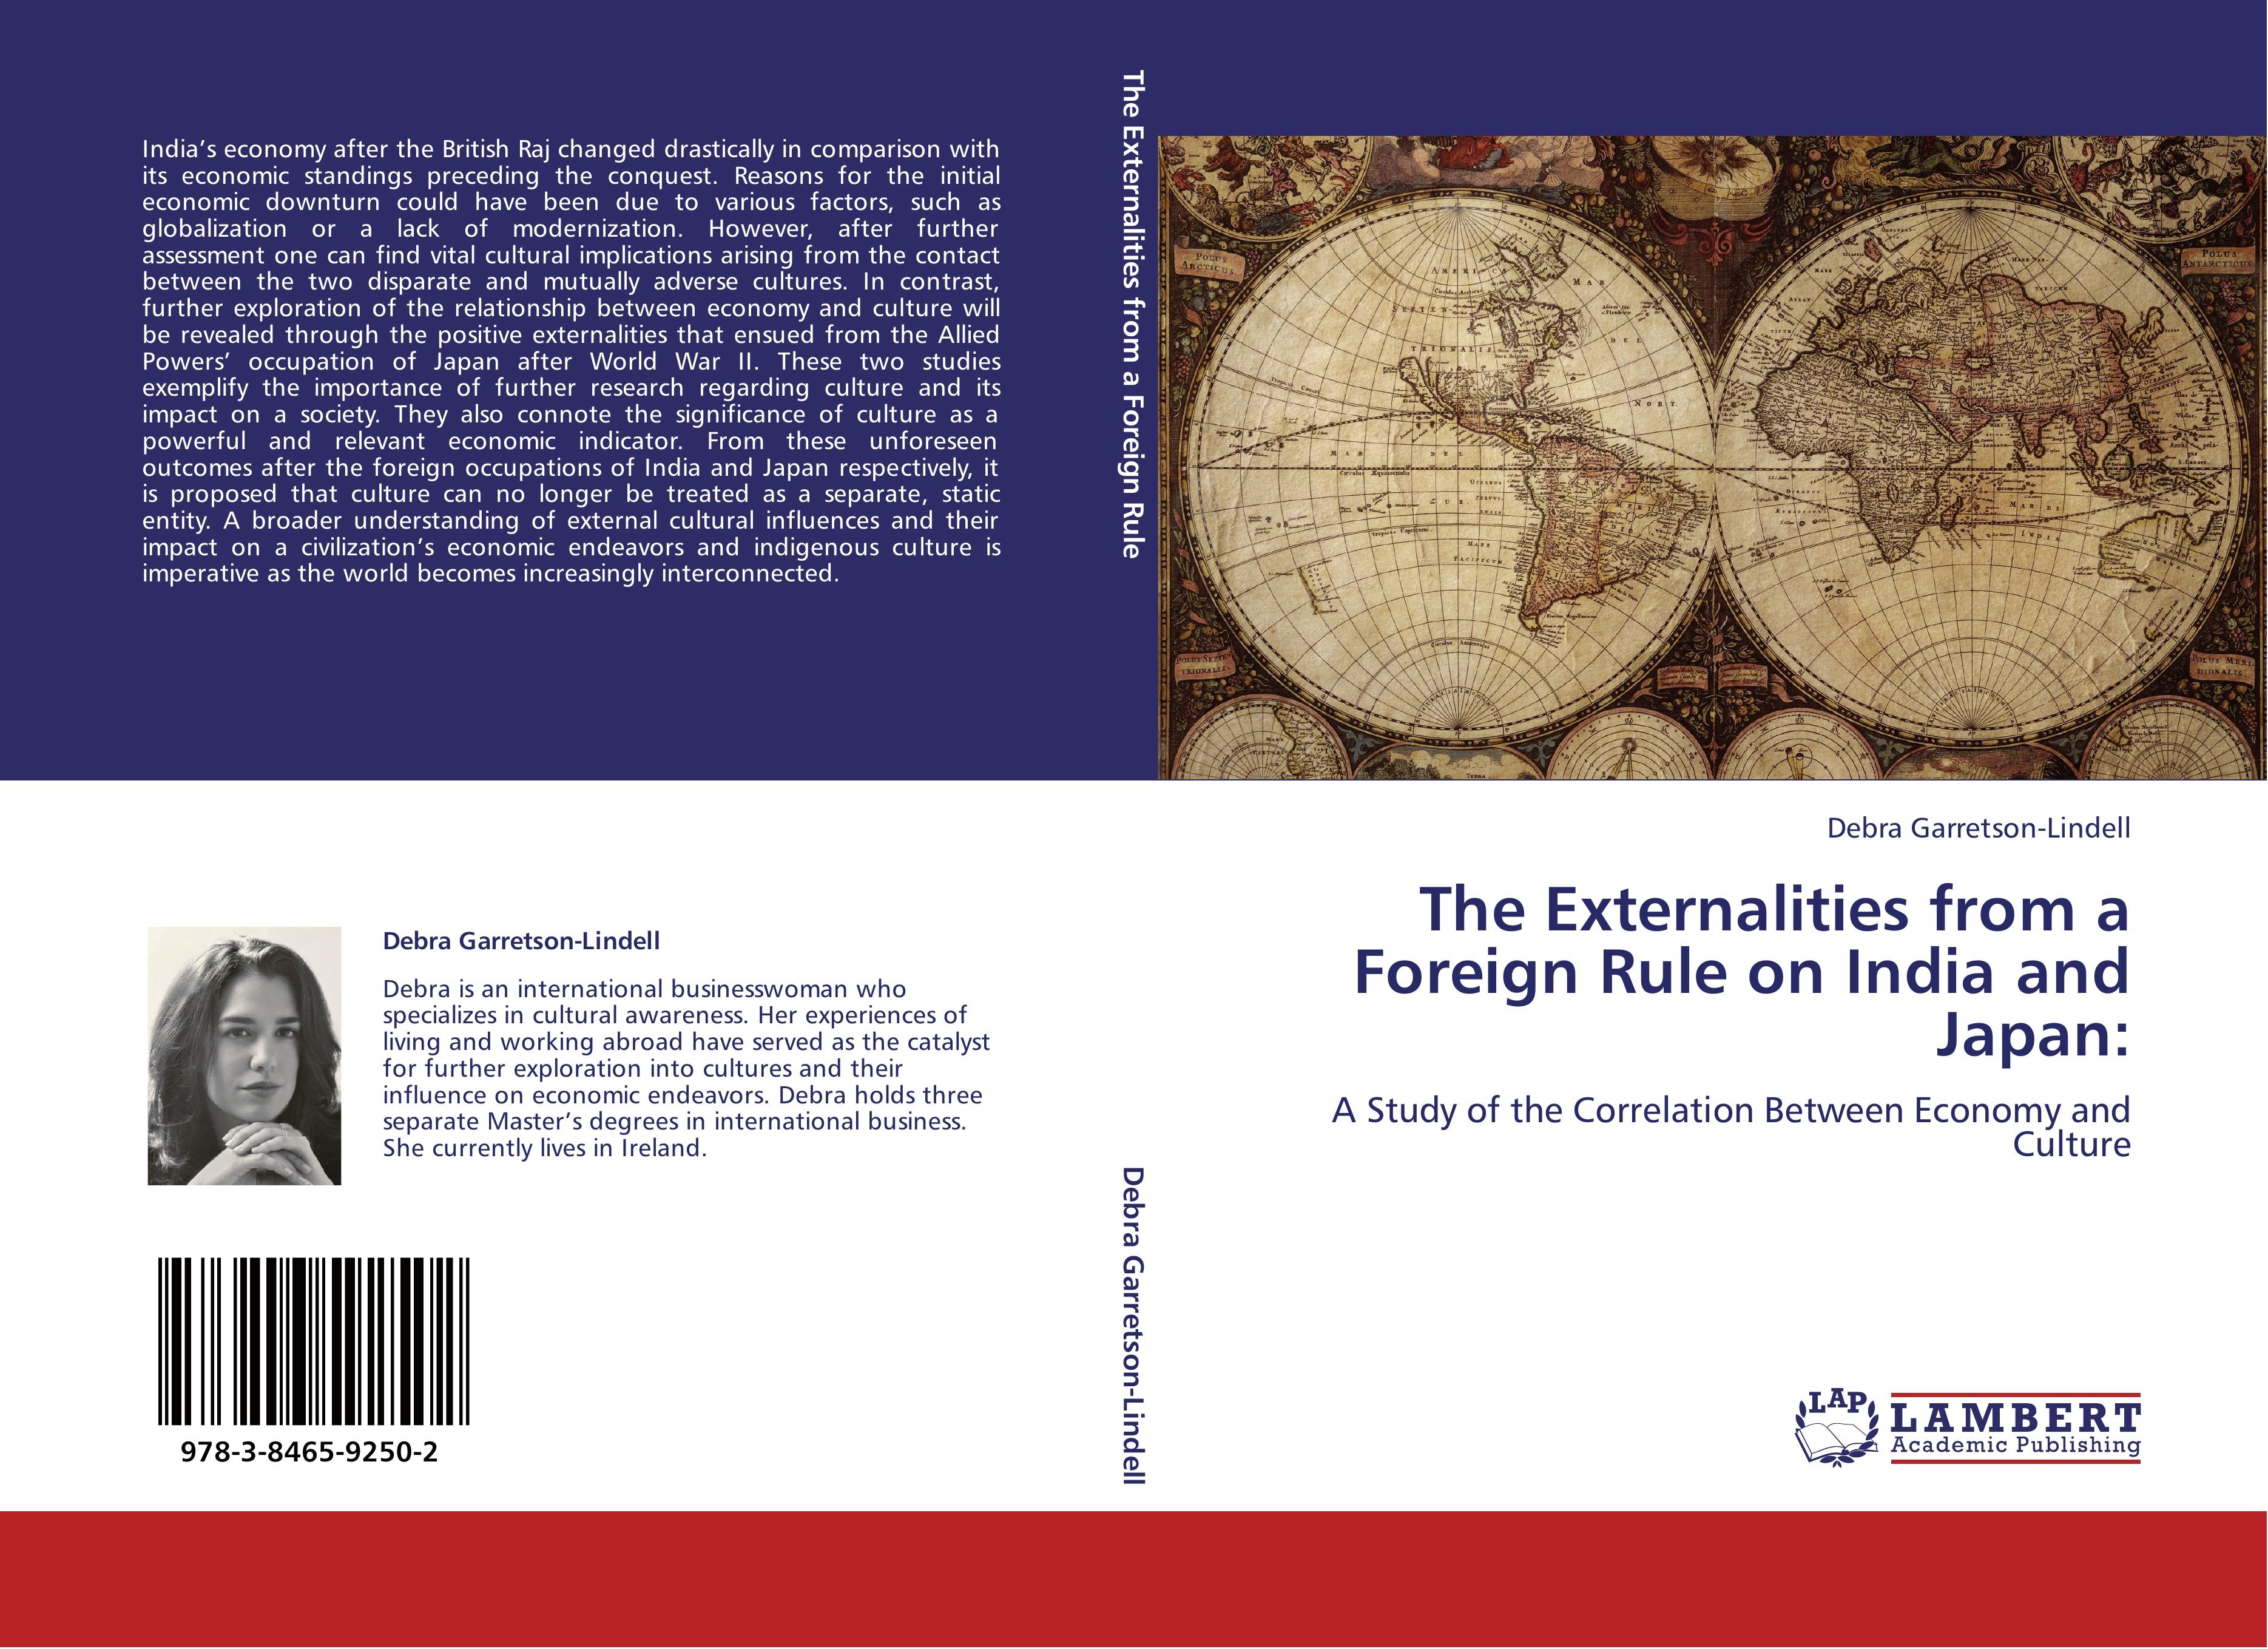 The Externalities from a Foreign Rule on India and Japan - Debra Garretson-Lindell